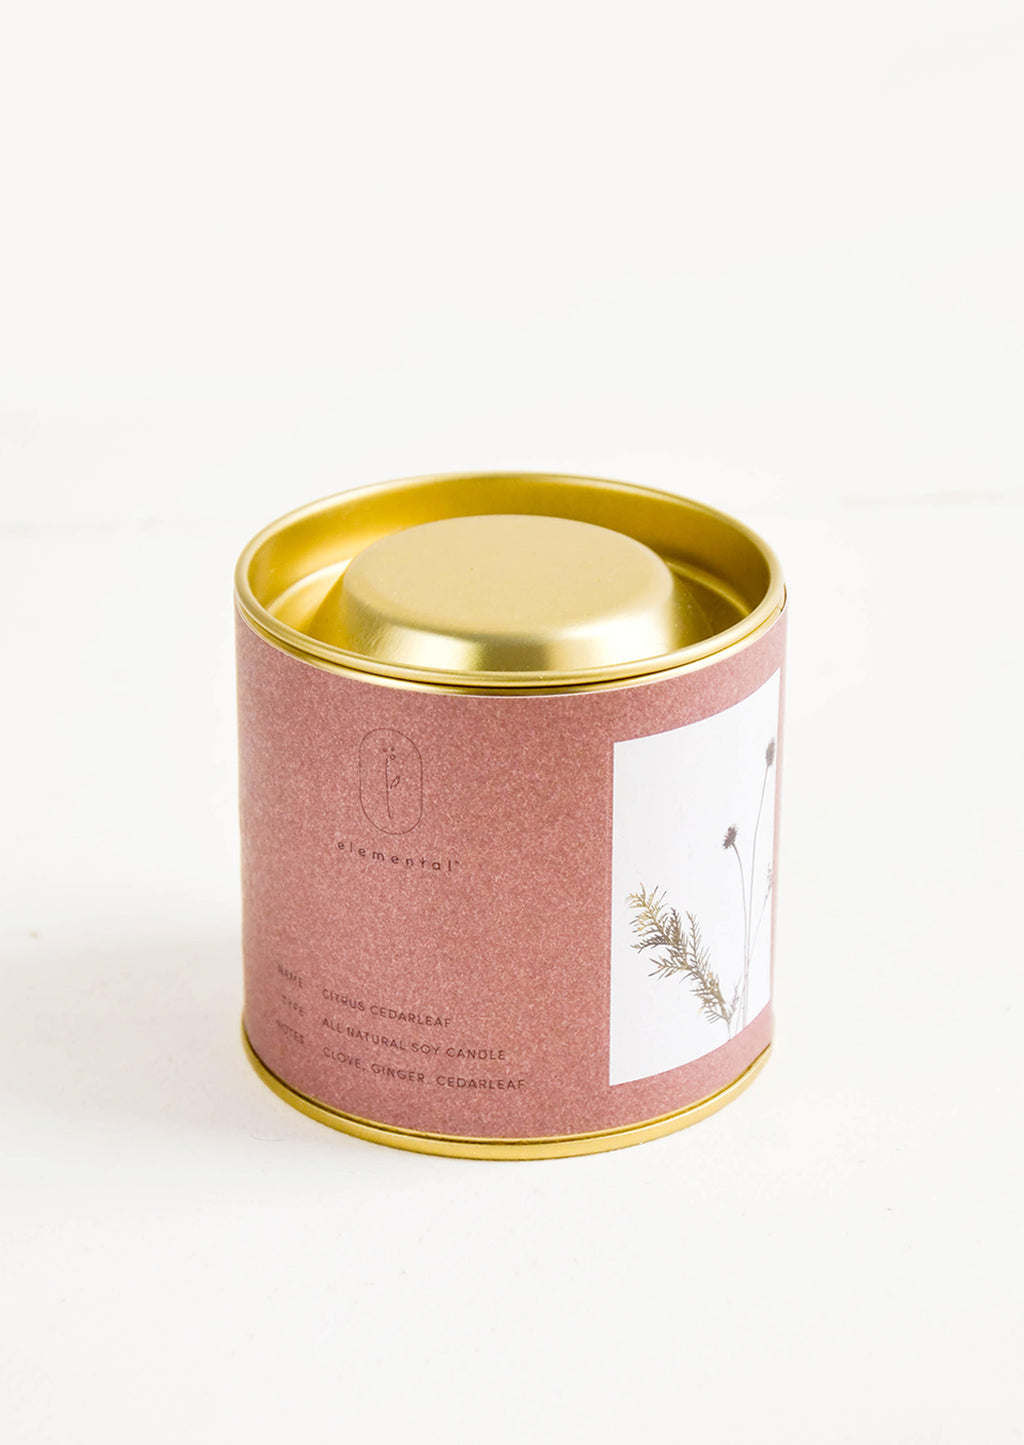 Citrus Cedarleaf: A candle in a brass tin with a dark red label featuring a picture of a flower.